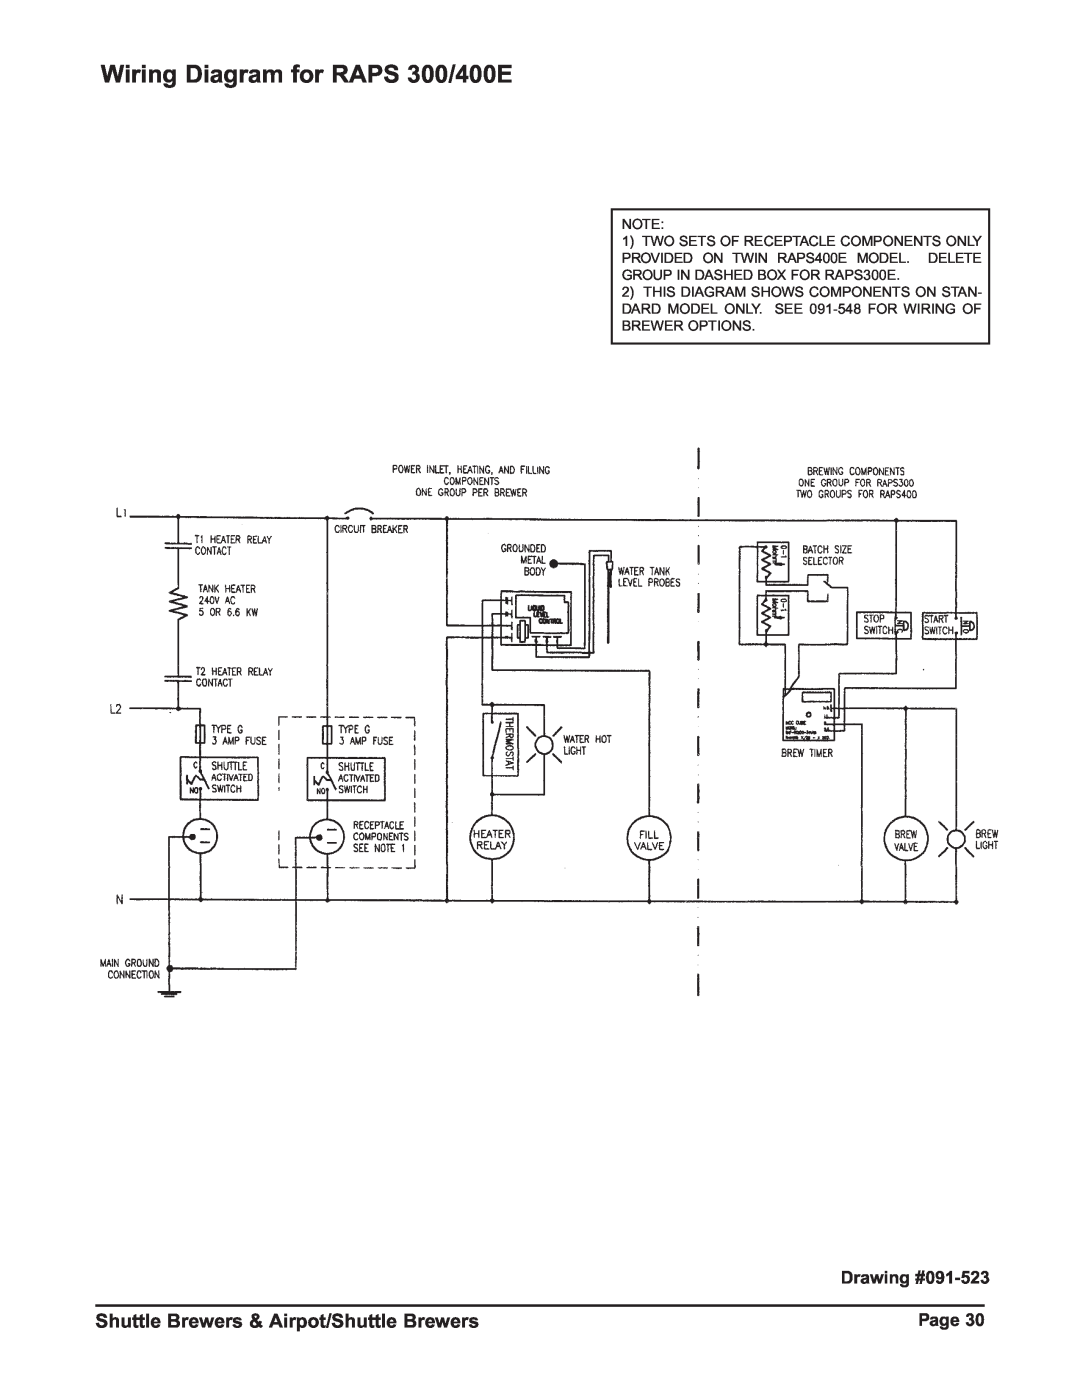 Grindmaster RAPS300E Wiring Diagram for RAPS 300/400E, Shuttle Brewers & Airpot/Shuttle Brewers, Drawing #091-523, Page 